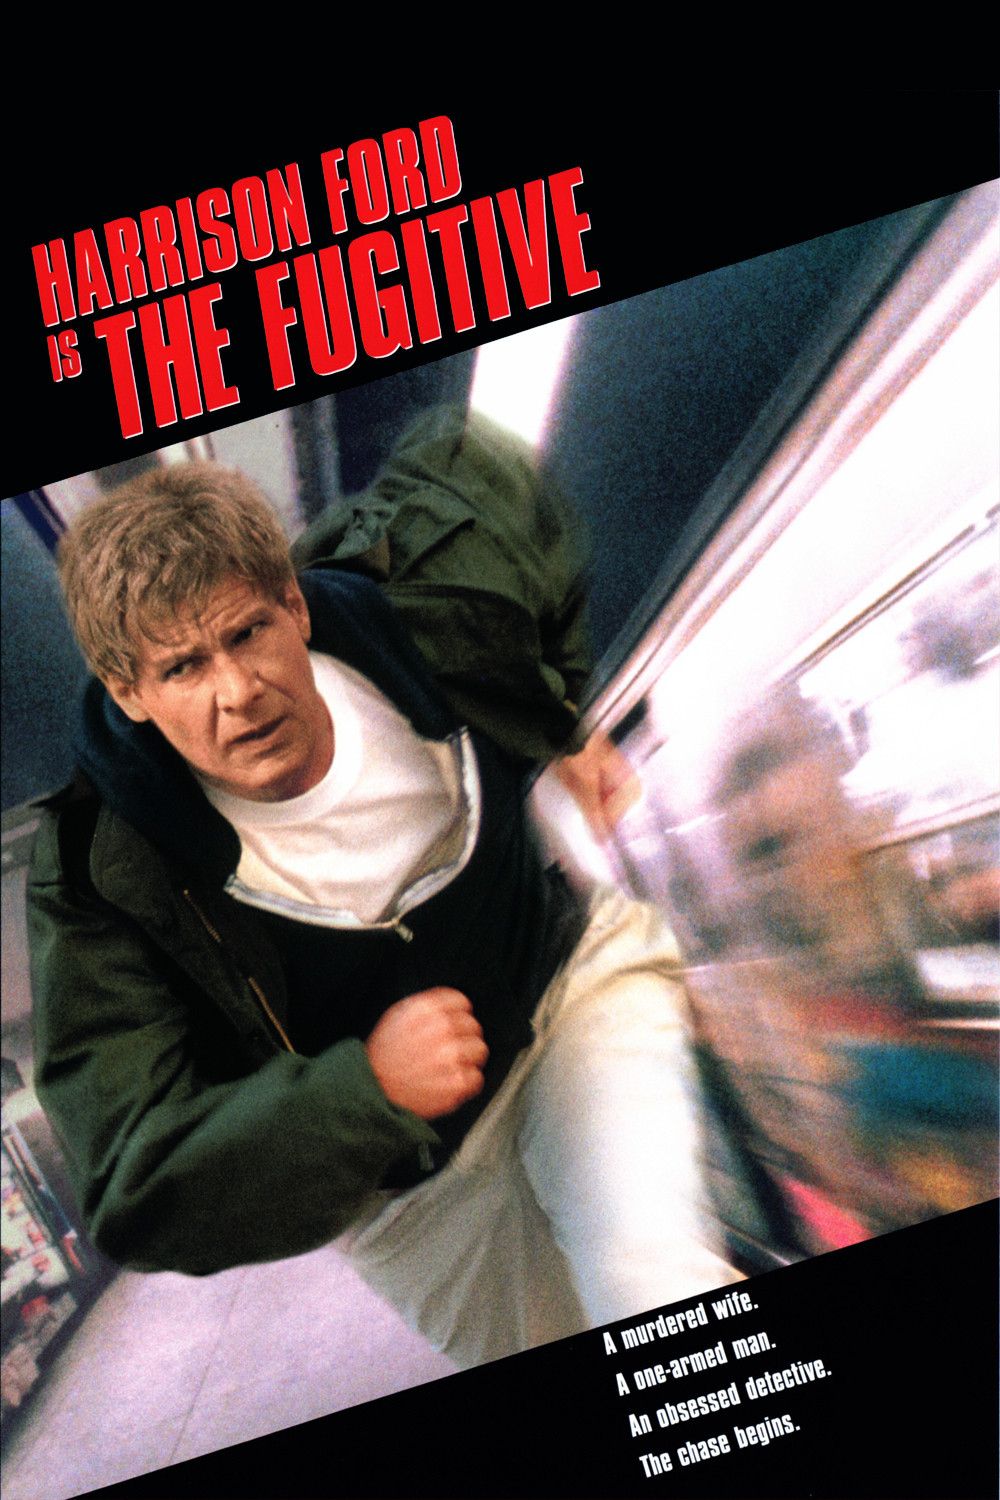 The fugitive the movie with harrison ford #5